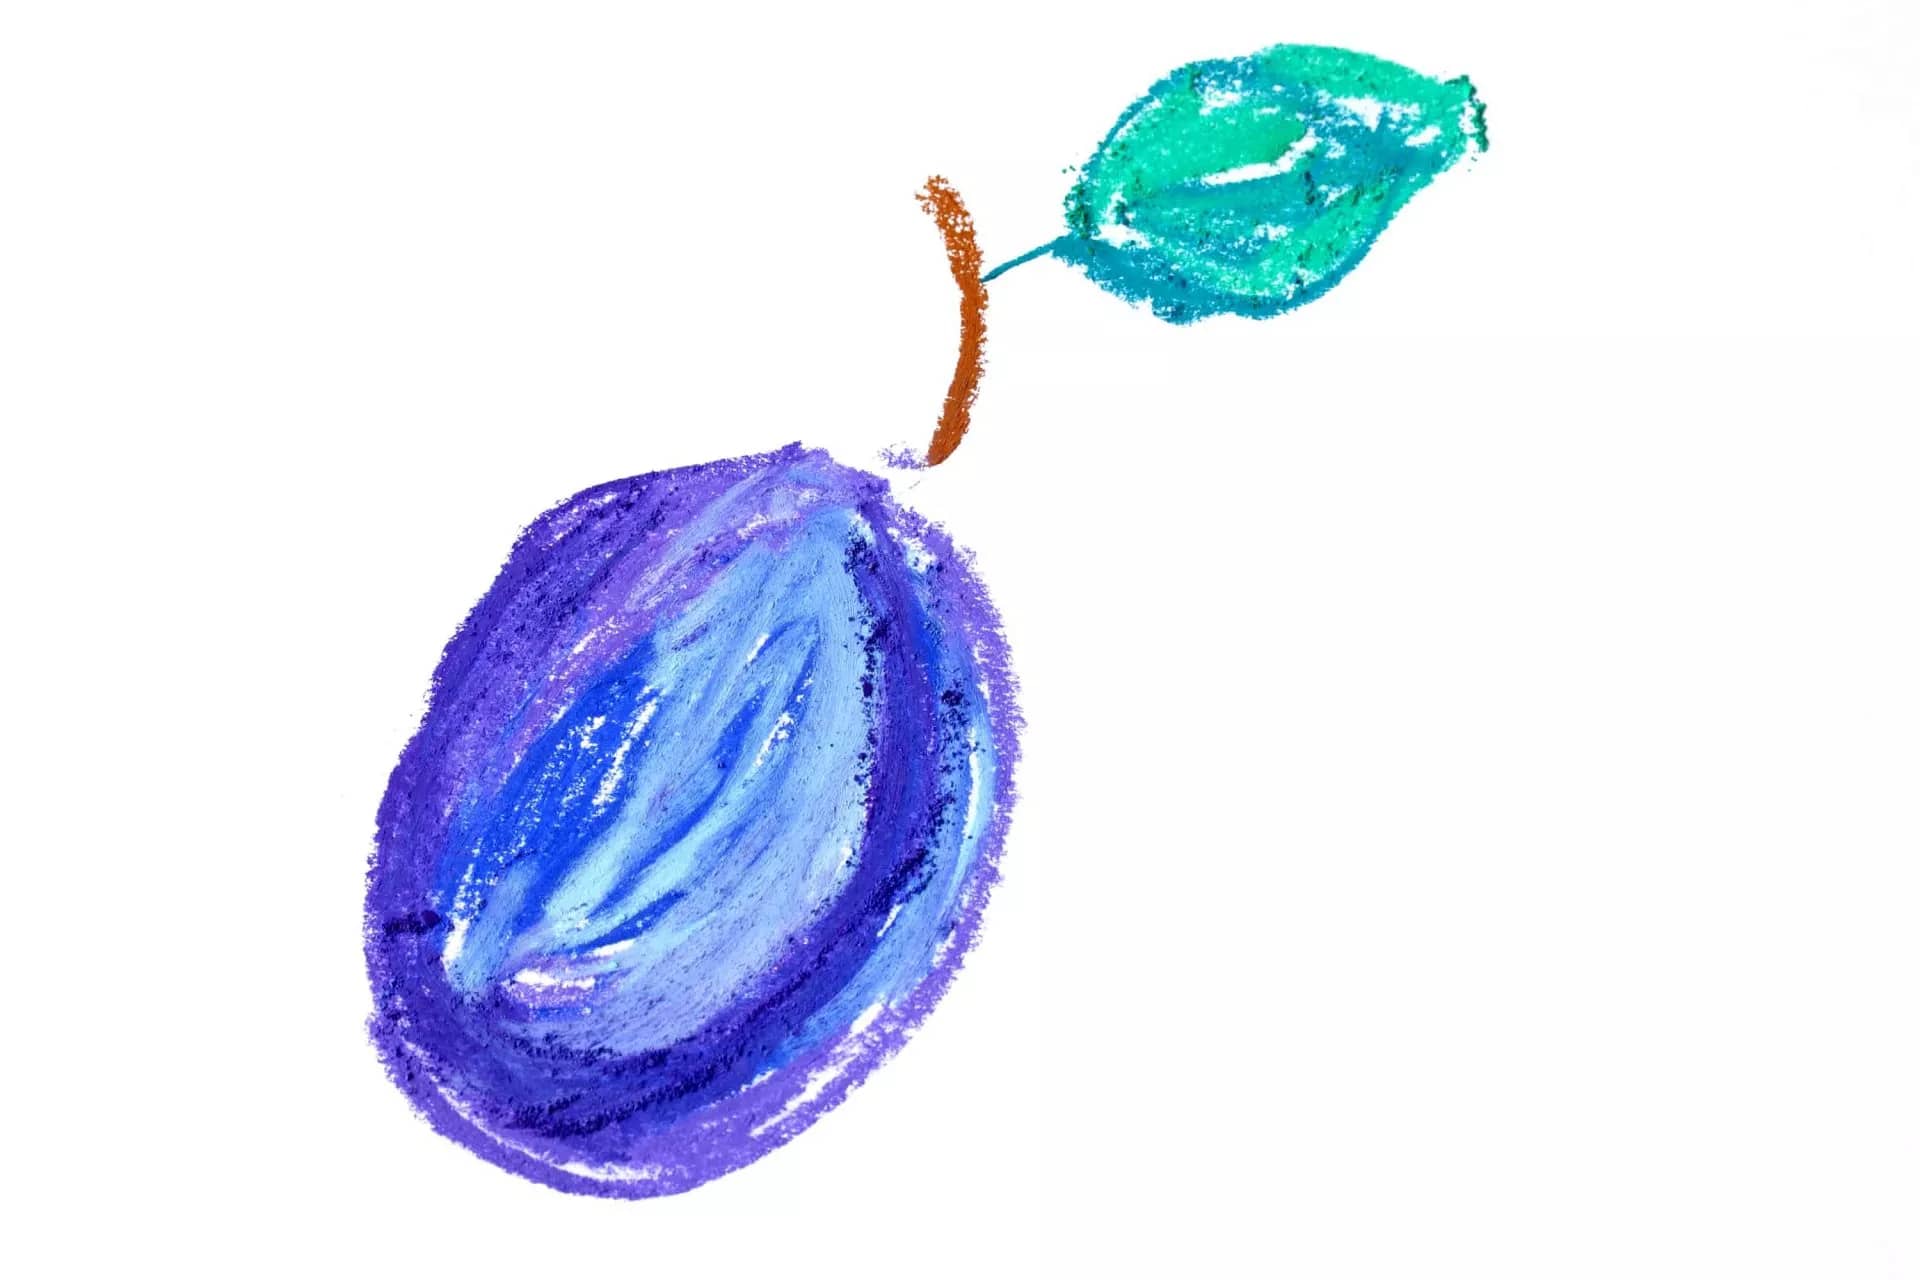 Plum with leaf drawing isolated on a white background